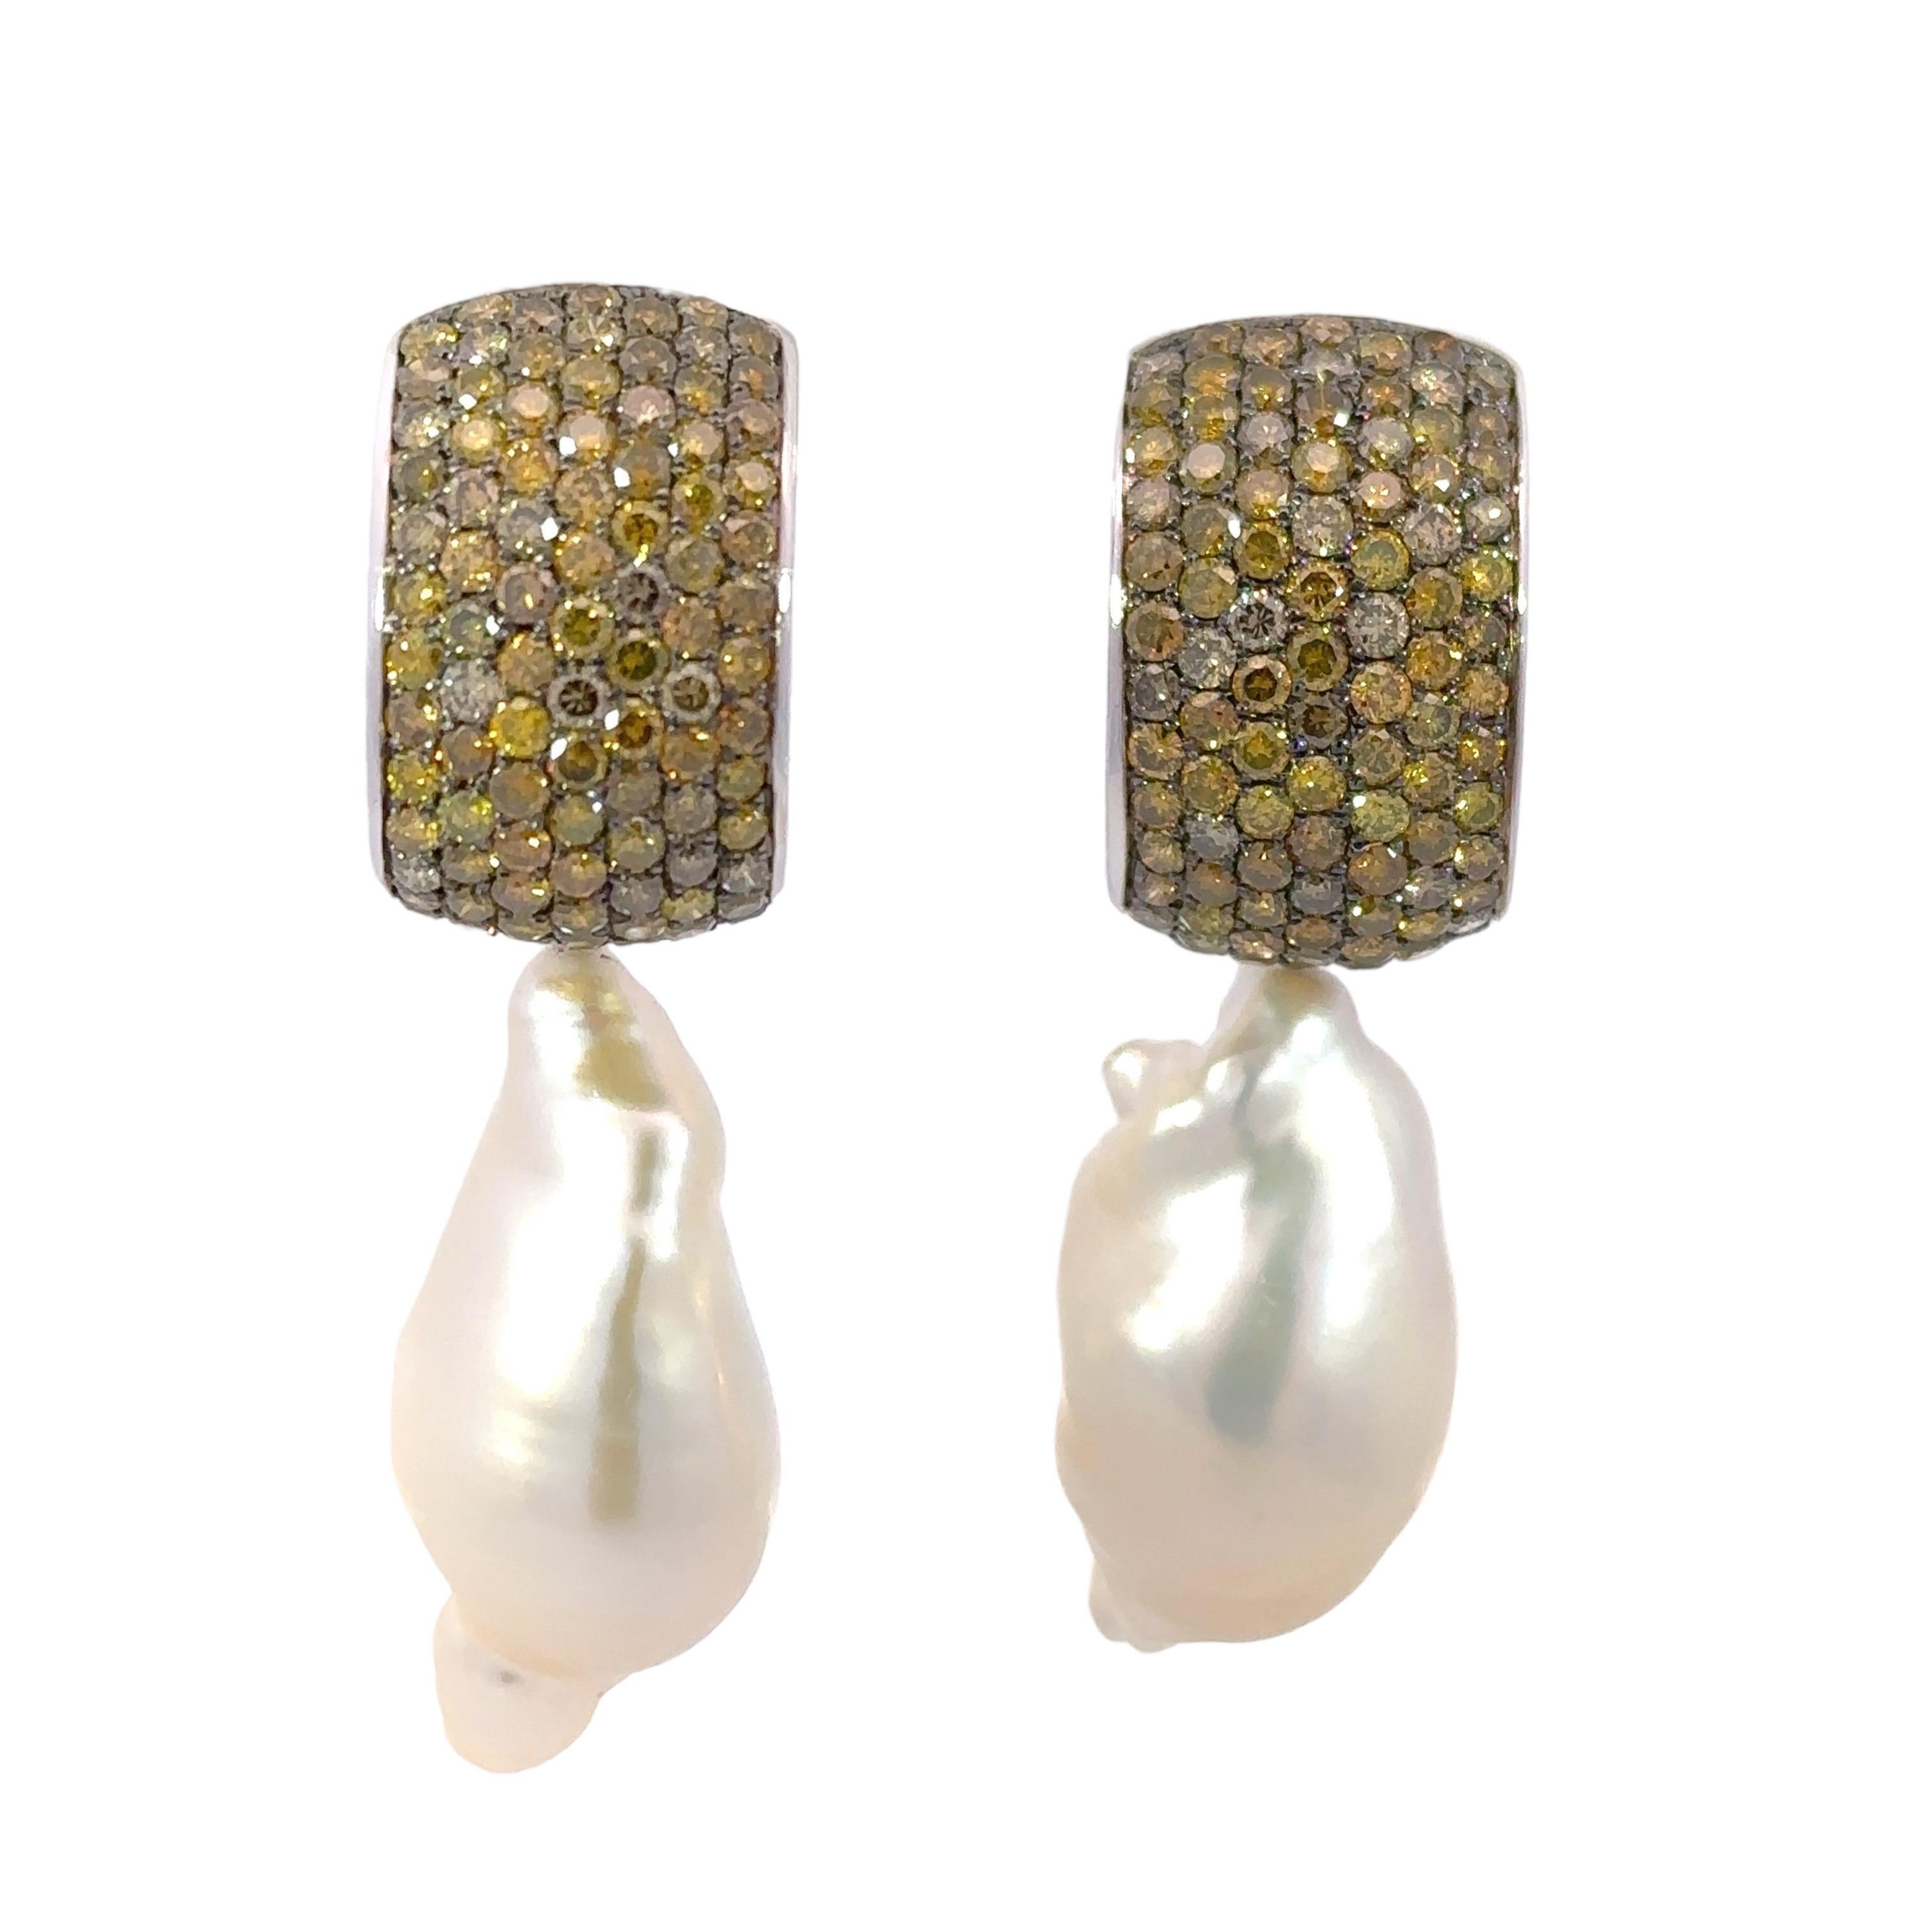 Amazing 18kt White Gold Earrings With Yellow/Cognac Diamonds and a Removable Pearl

When purchasing earring it comes with a set of removable pearls but 3 additional Options of Removable pieces available for purchase, See attached photographs, Please